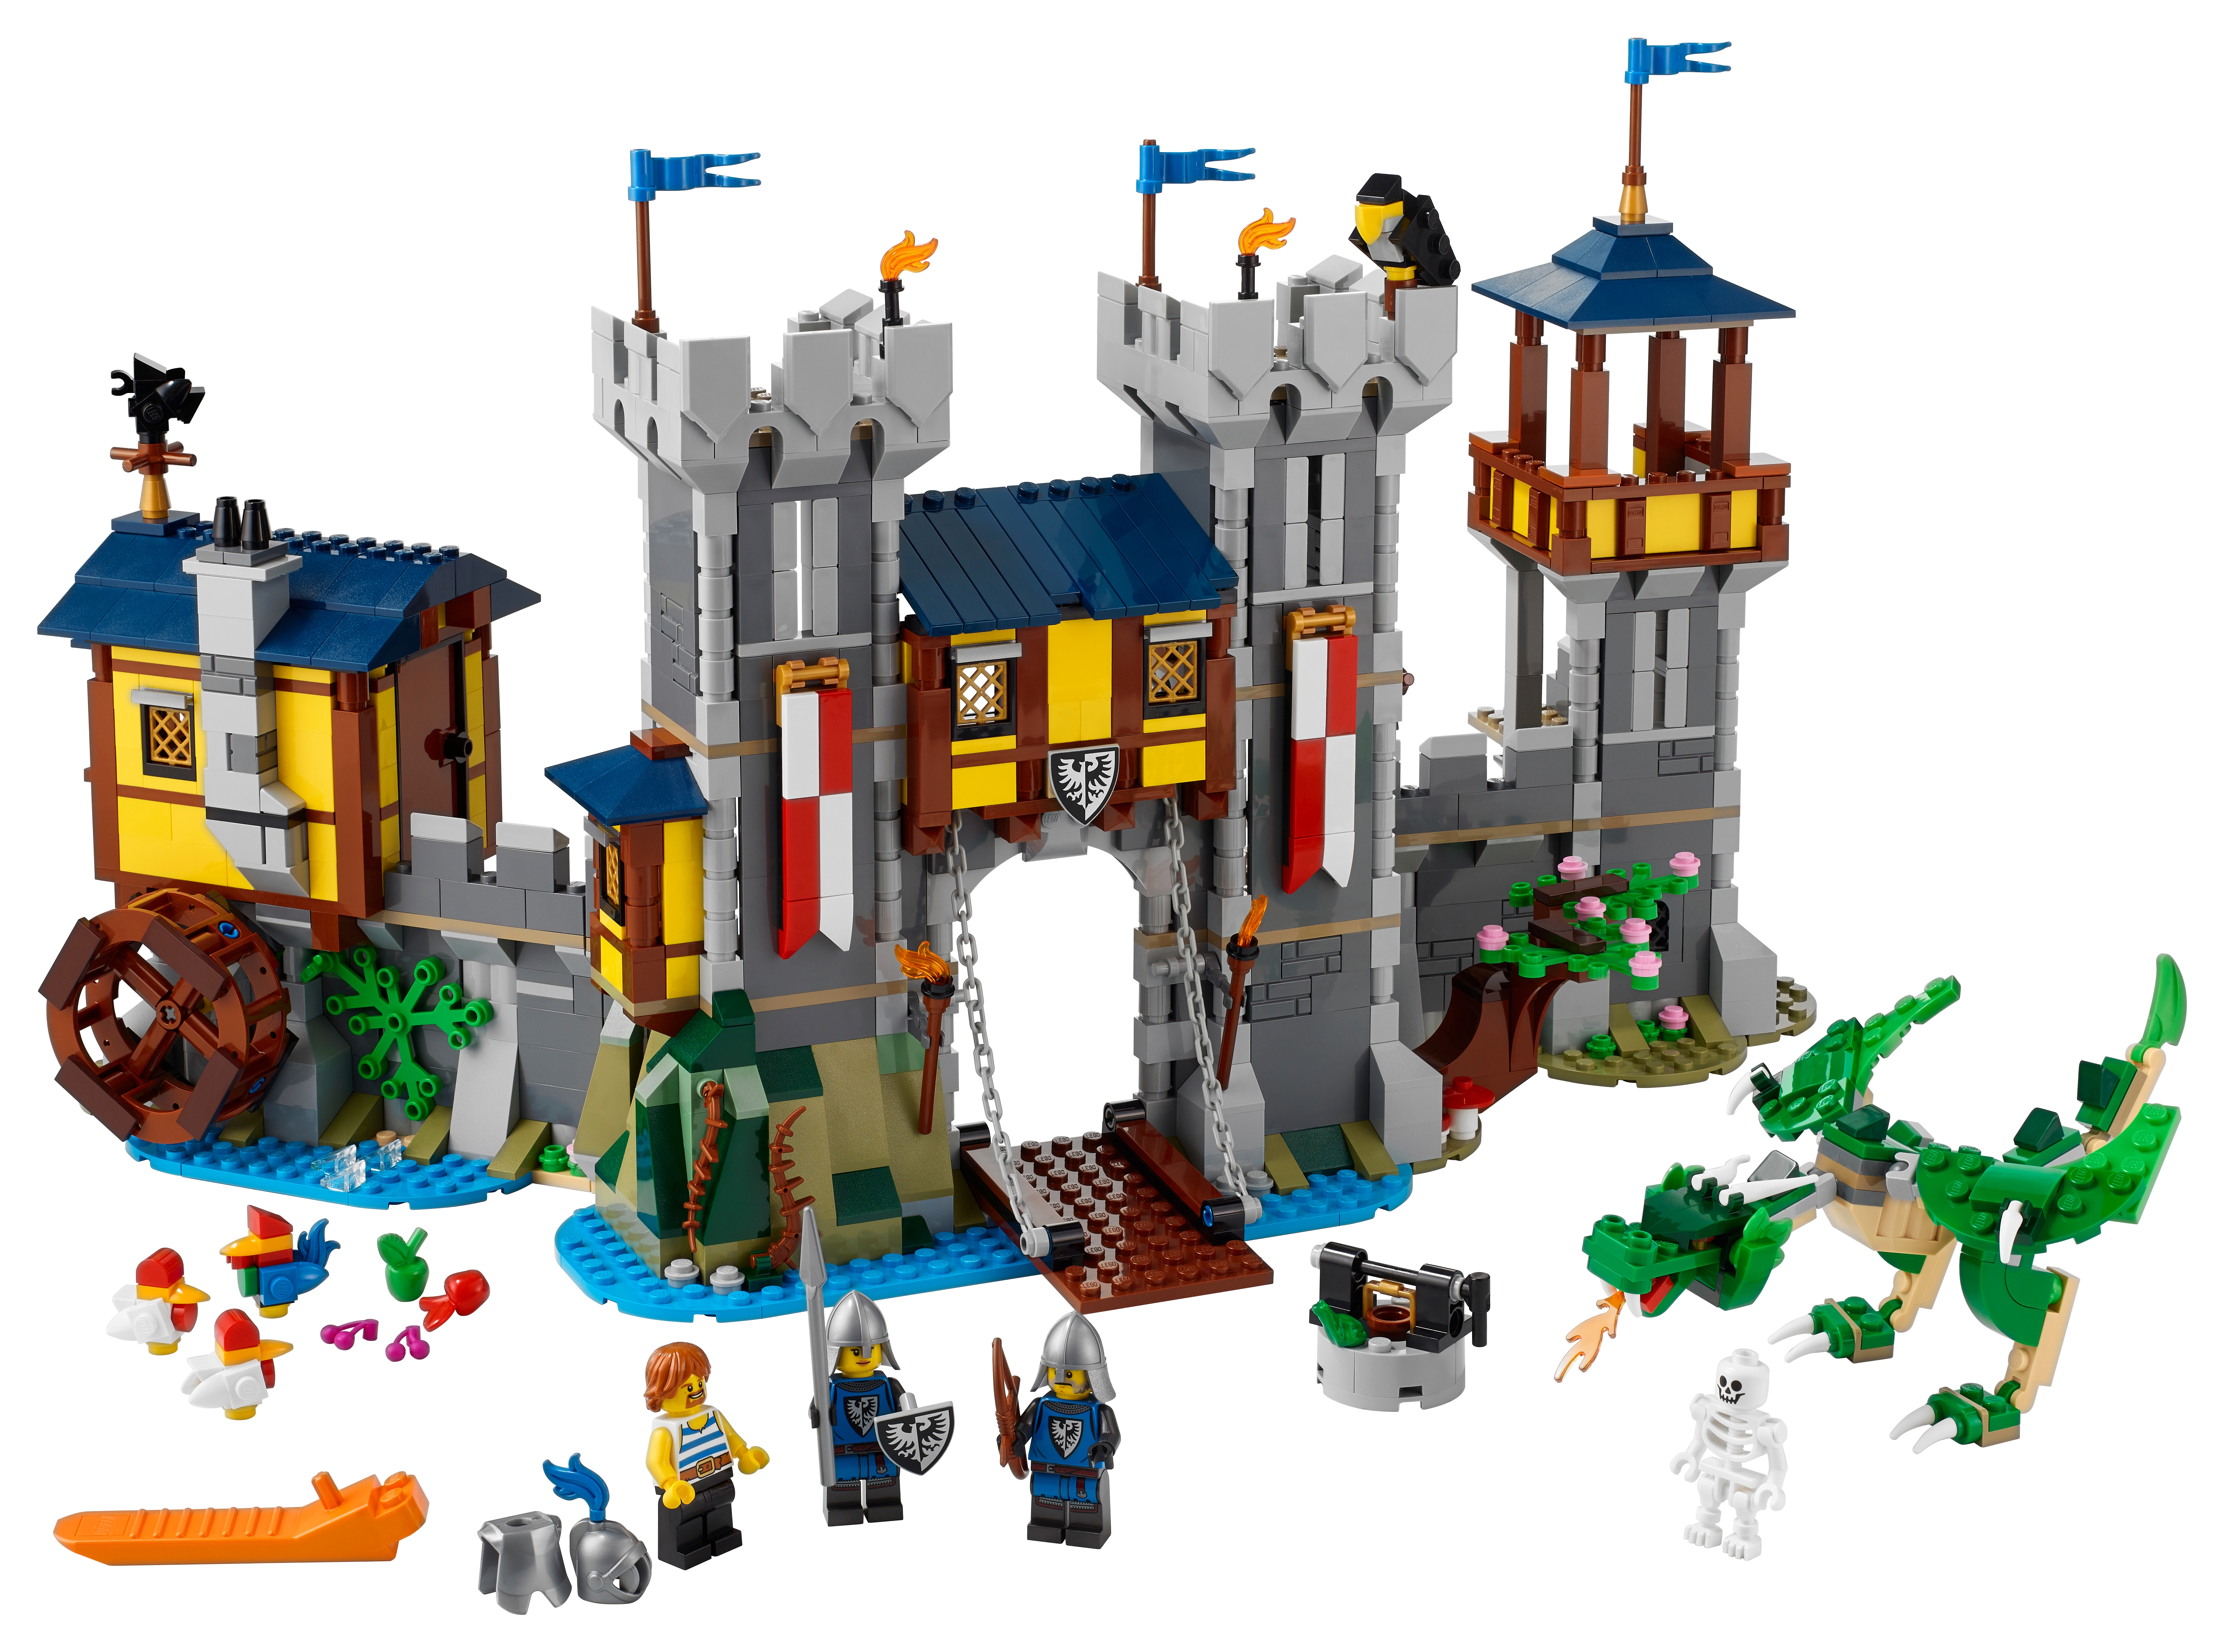 LEGO Icons Eldorado Fortress with Pirate Ship Building Kit 10320 6426510 -  Best Buy